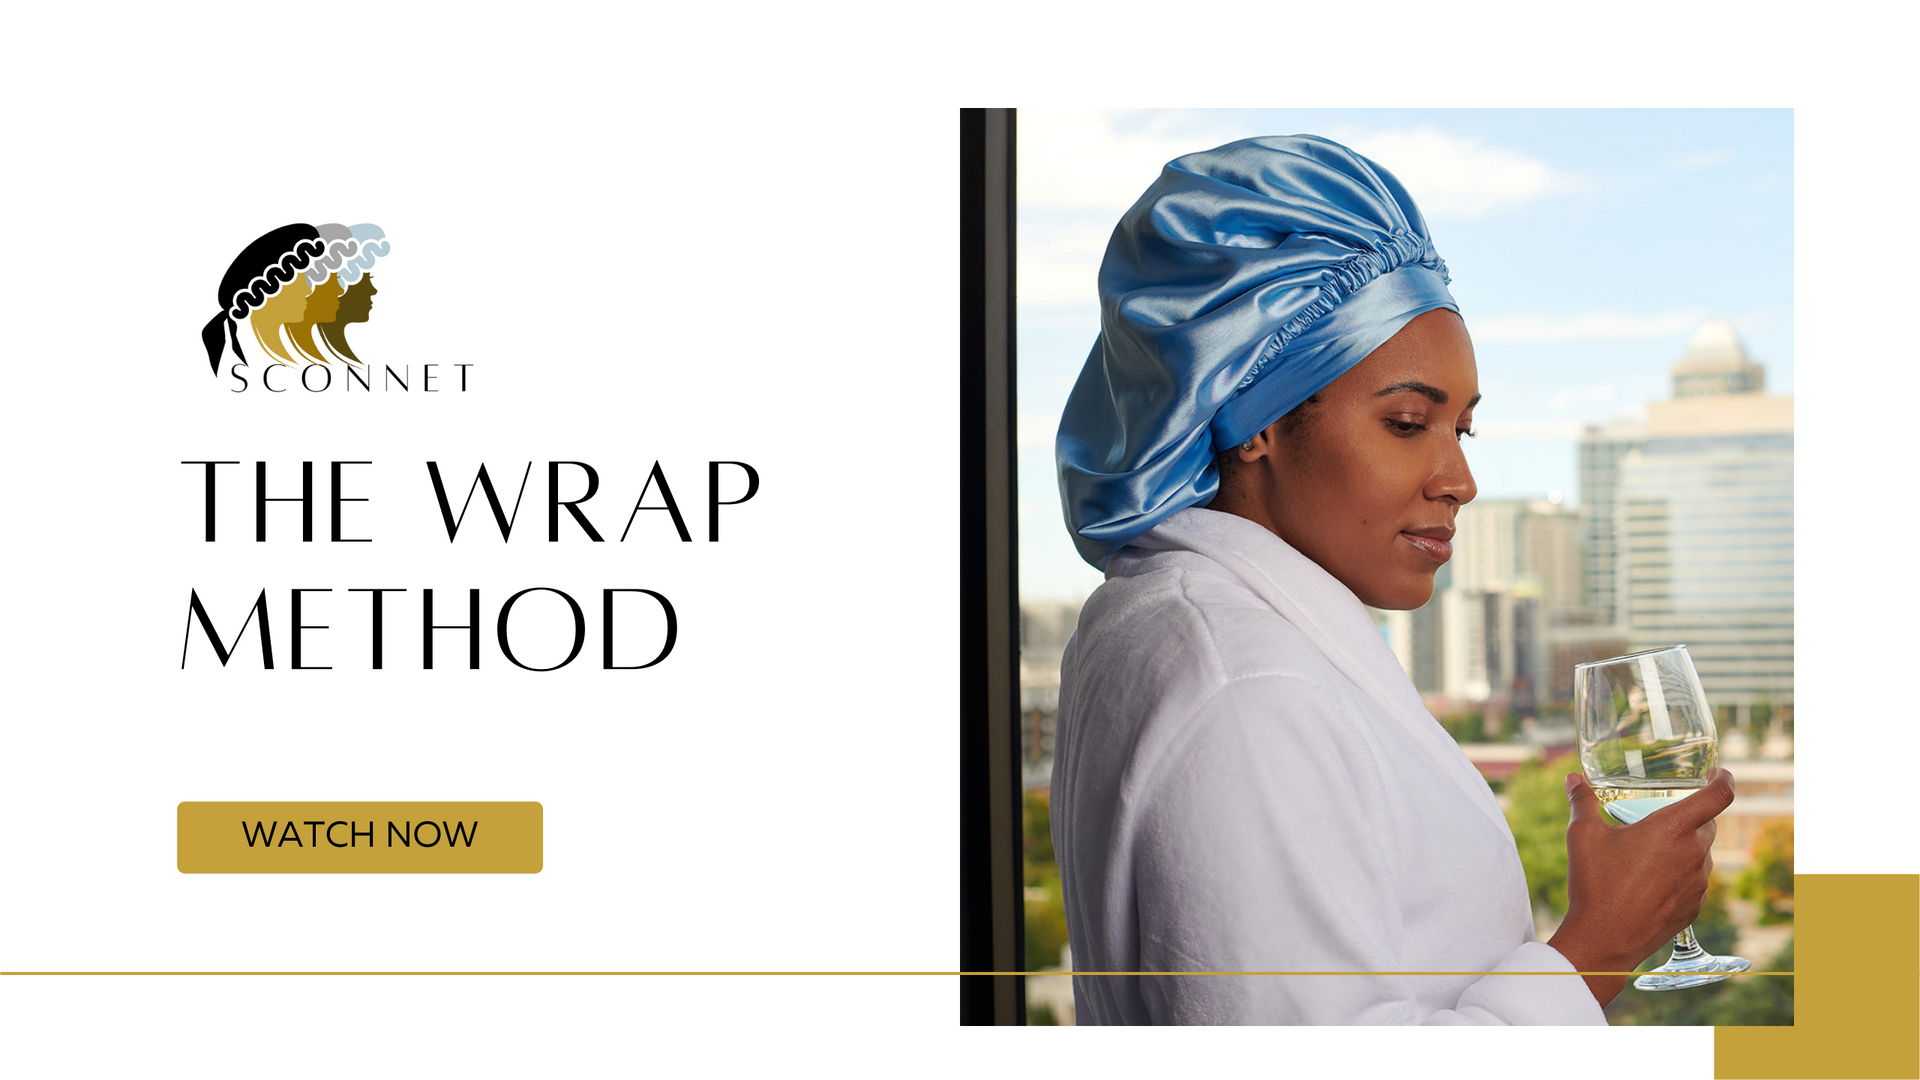 Load video: For those of you who prefer straight styles and wrap your hair at night, you can secure your wrap with the scarf attachment and then place the bonnet over your head for extra protection.